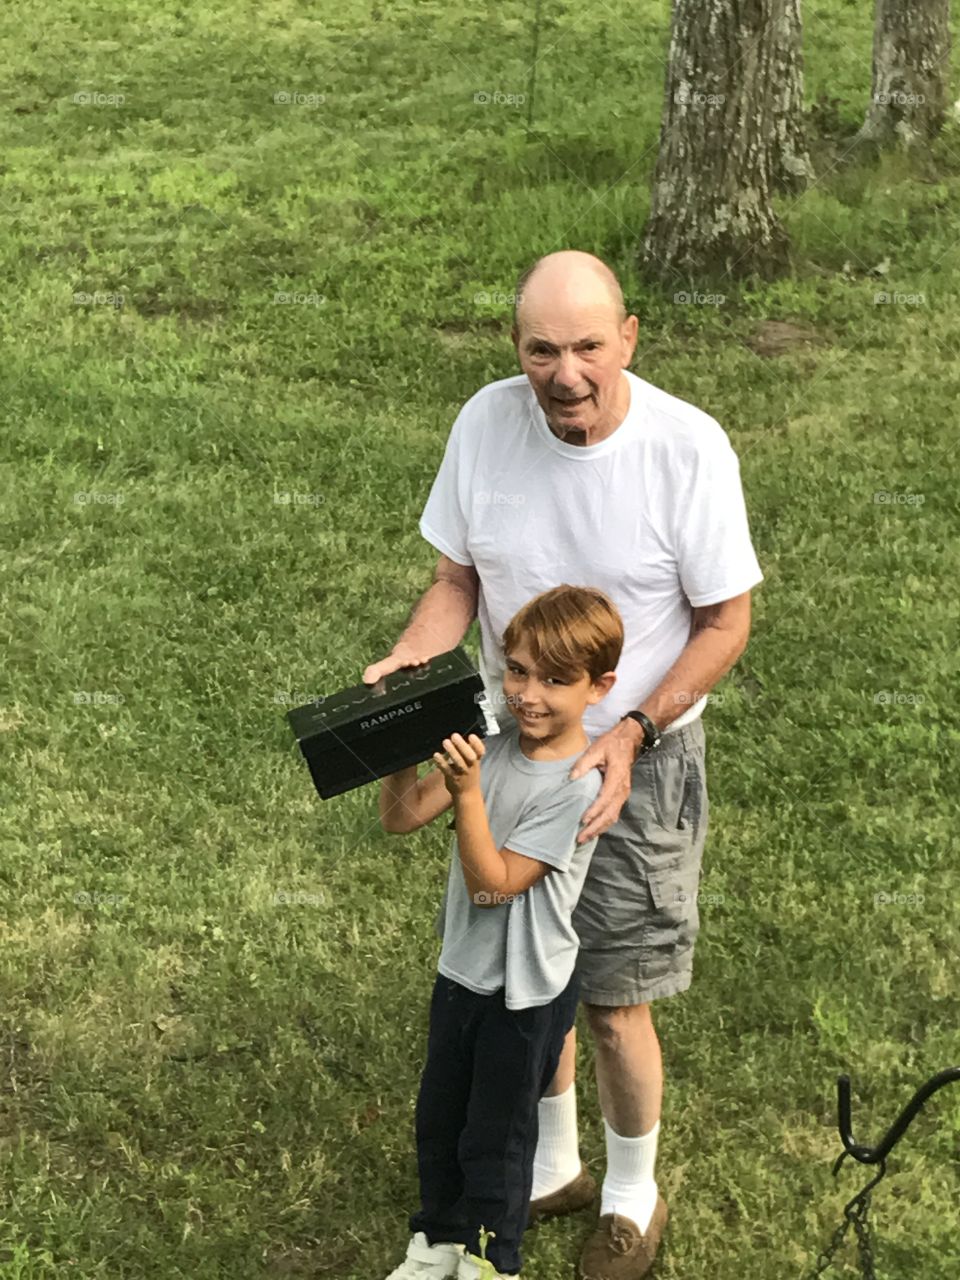 Getting ready for the eclipse with grandpa